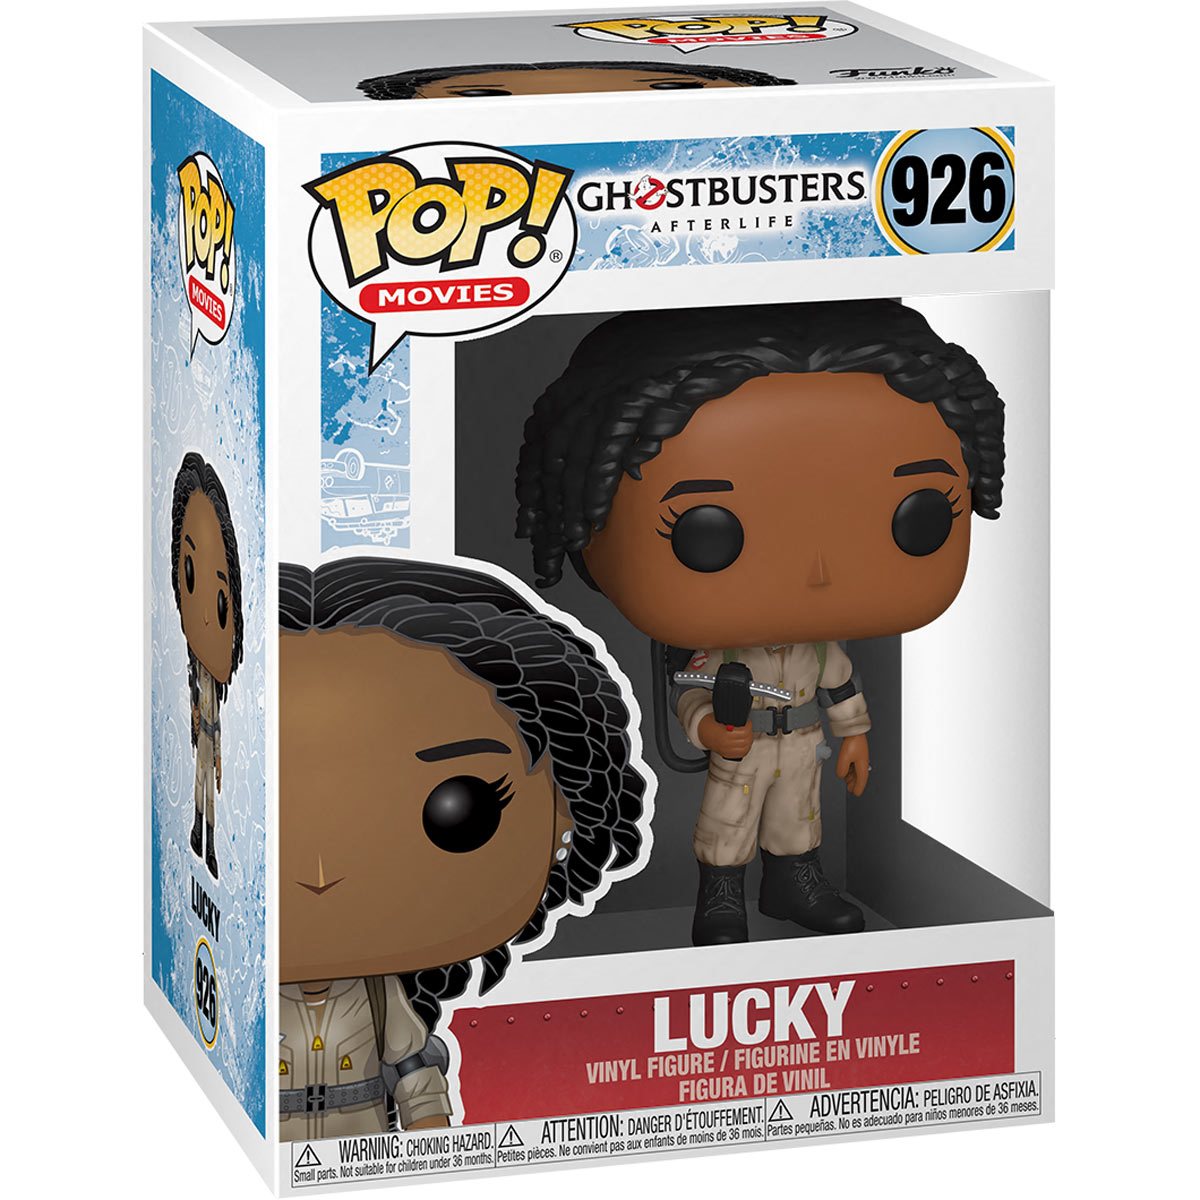 Pop! Movies: Ghostbusters Afterlife - Lucky #926 Vinyl Figure